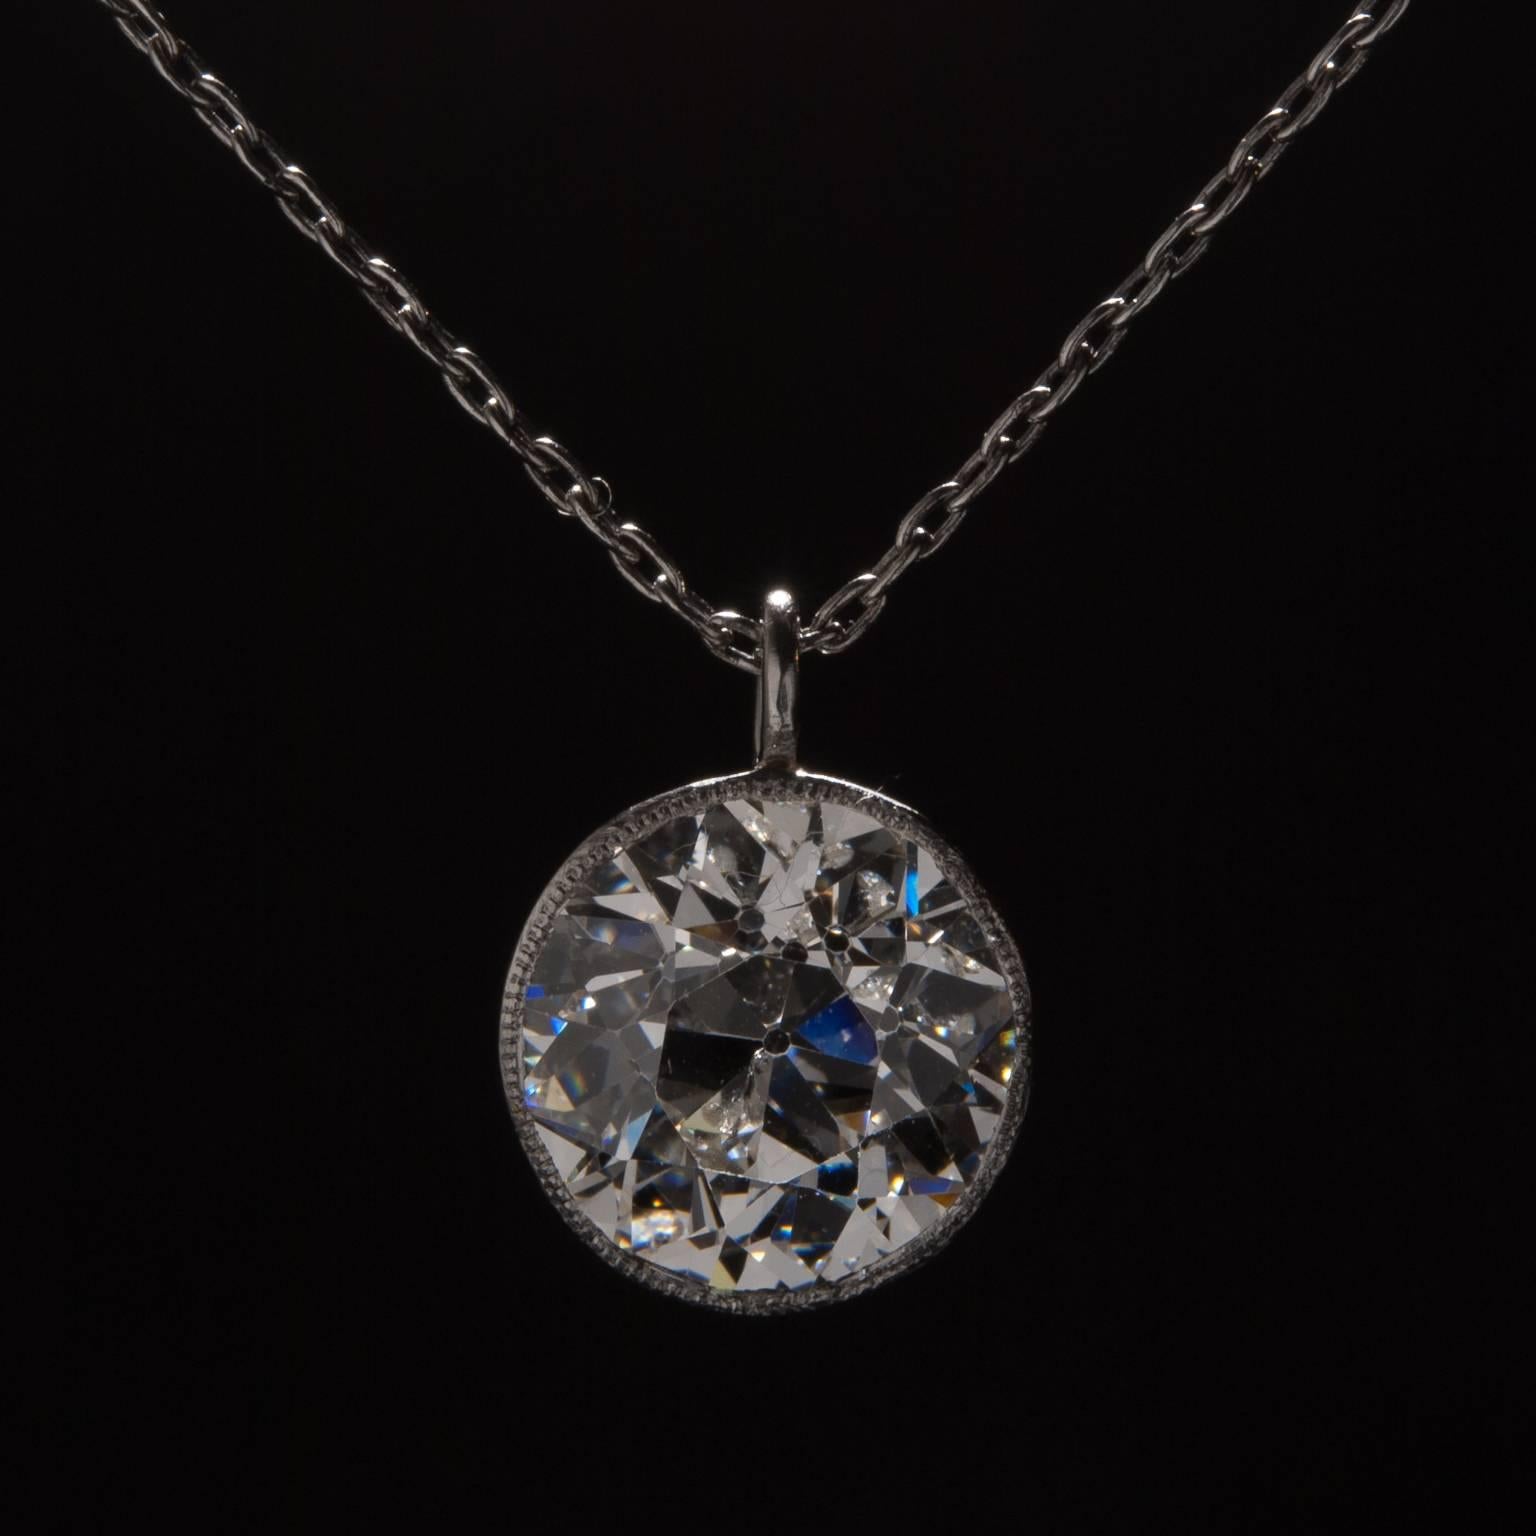 An incredible 3.79 carat old European cut diamond pendant (D color, SI2 clarity) on a 16 inch platinum chain.